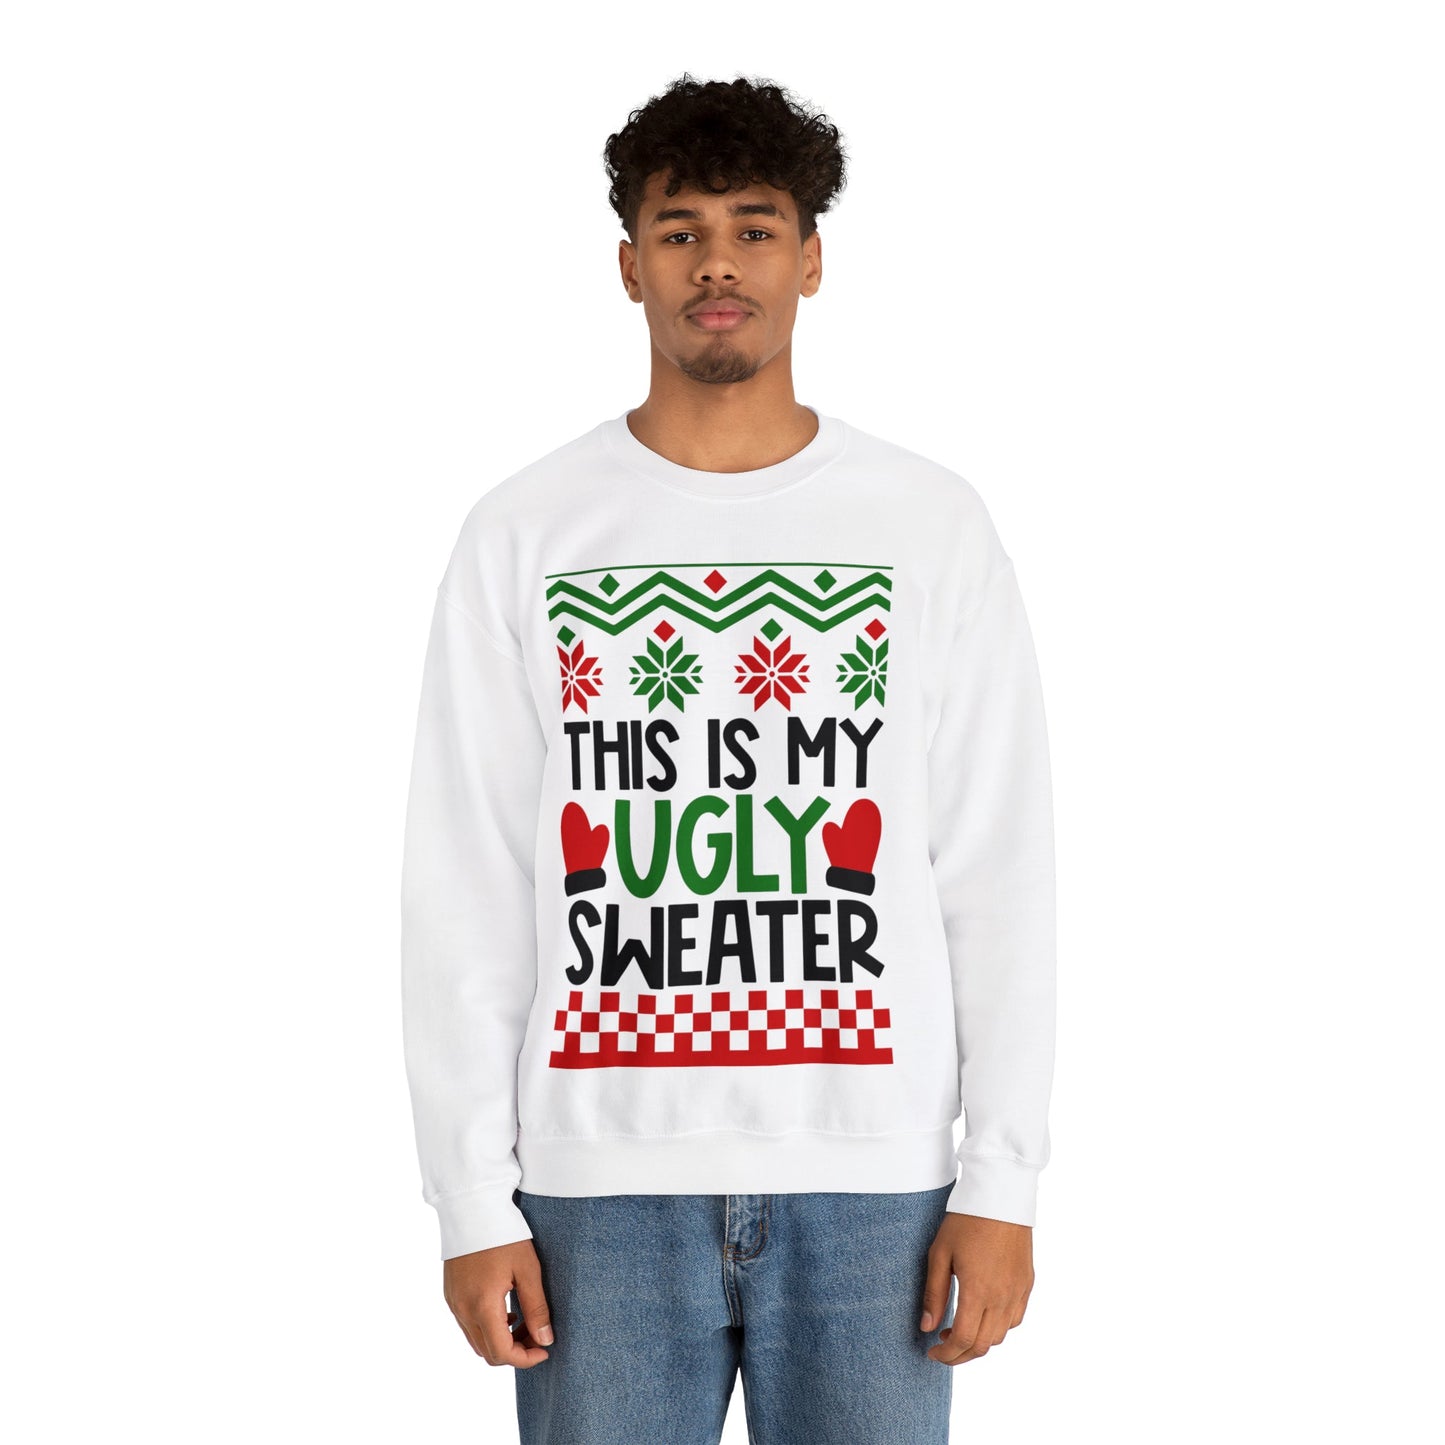 Get trendy with This is my Ugly Christmas Sweater - Sweatshirt available at Good Gift Company. Grab yours for $29.99 today!